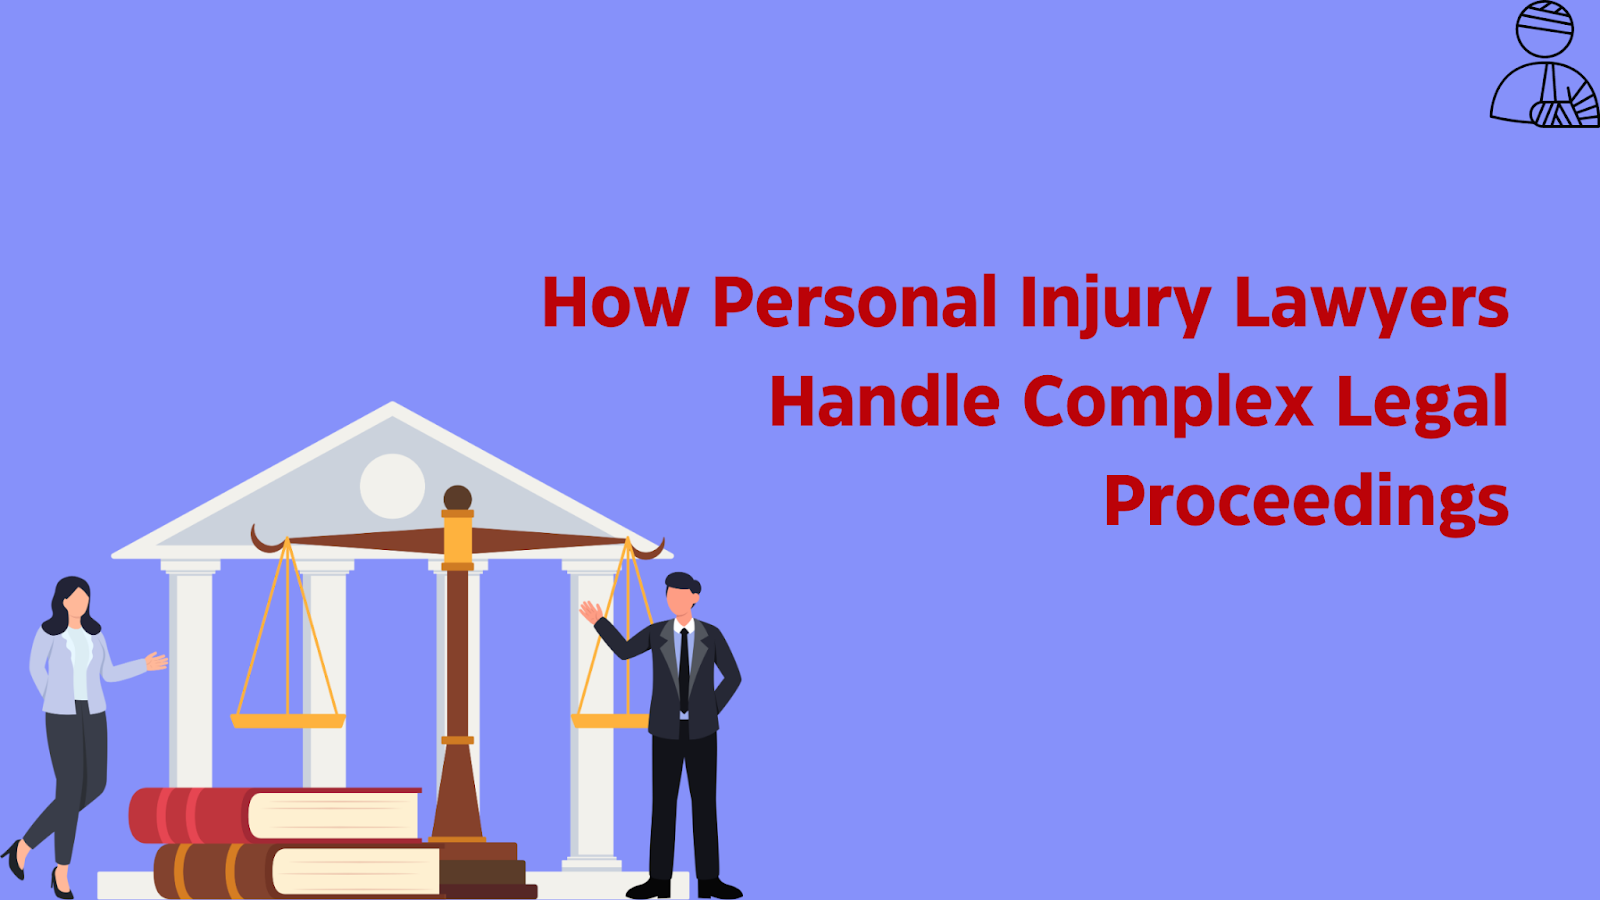 How Personal Injury Lawyers Handle Complex Legal Proceedings